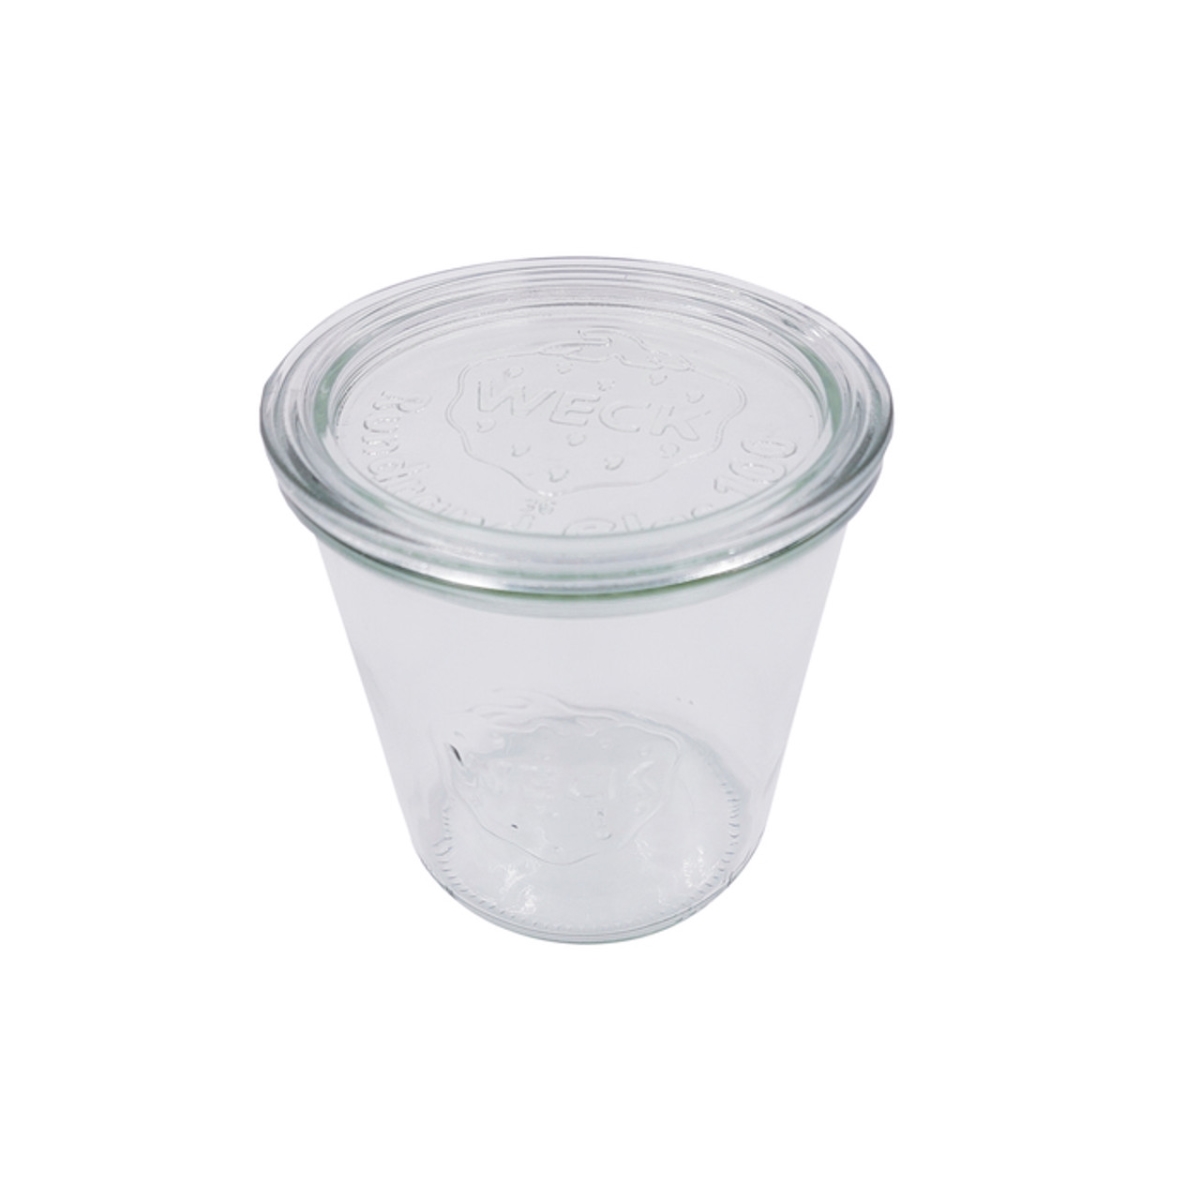 Picture of Packnwood 294WEK743 3.93 Dia. x 5.9 in. 28.7 oz Bokocook Reusable Weck Jars with Glass Lid Mold - 6 Piece